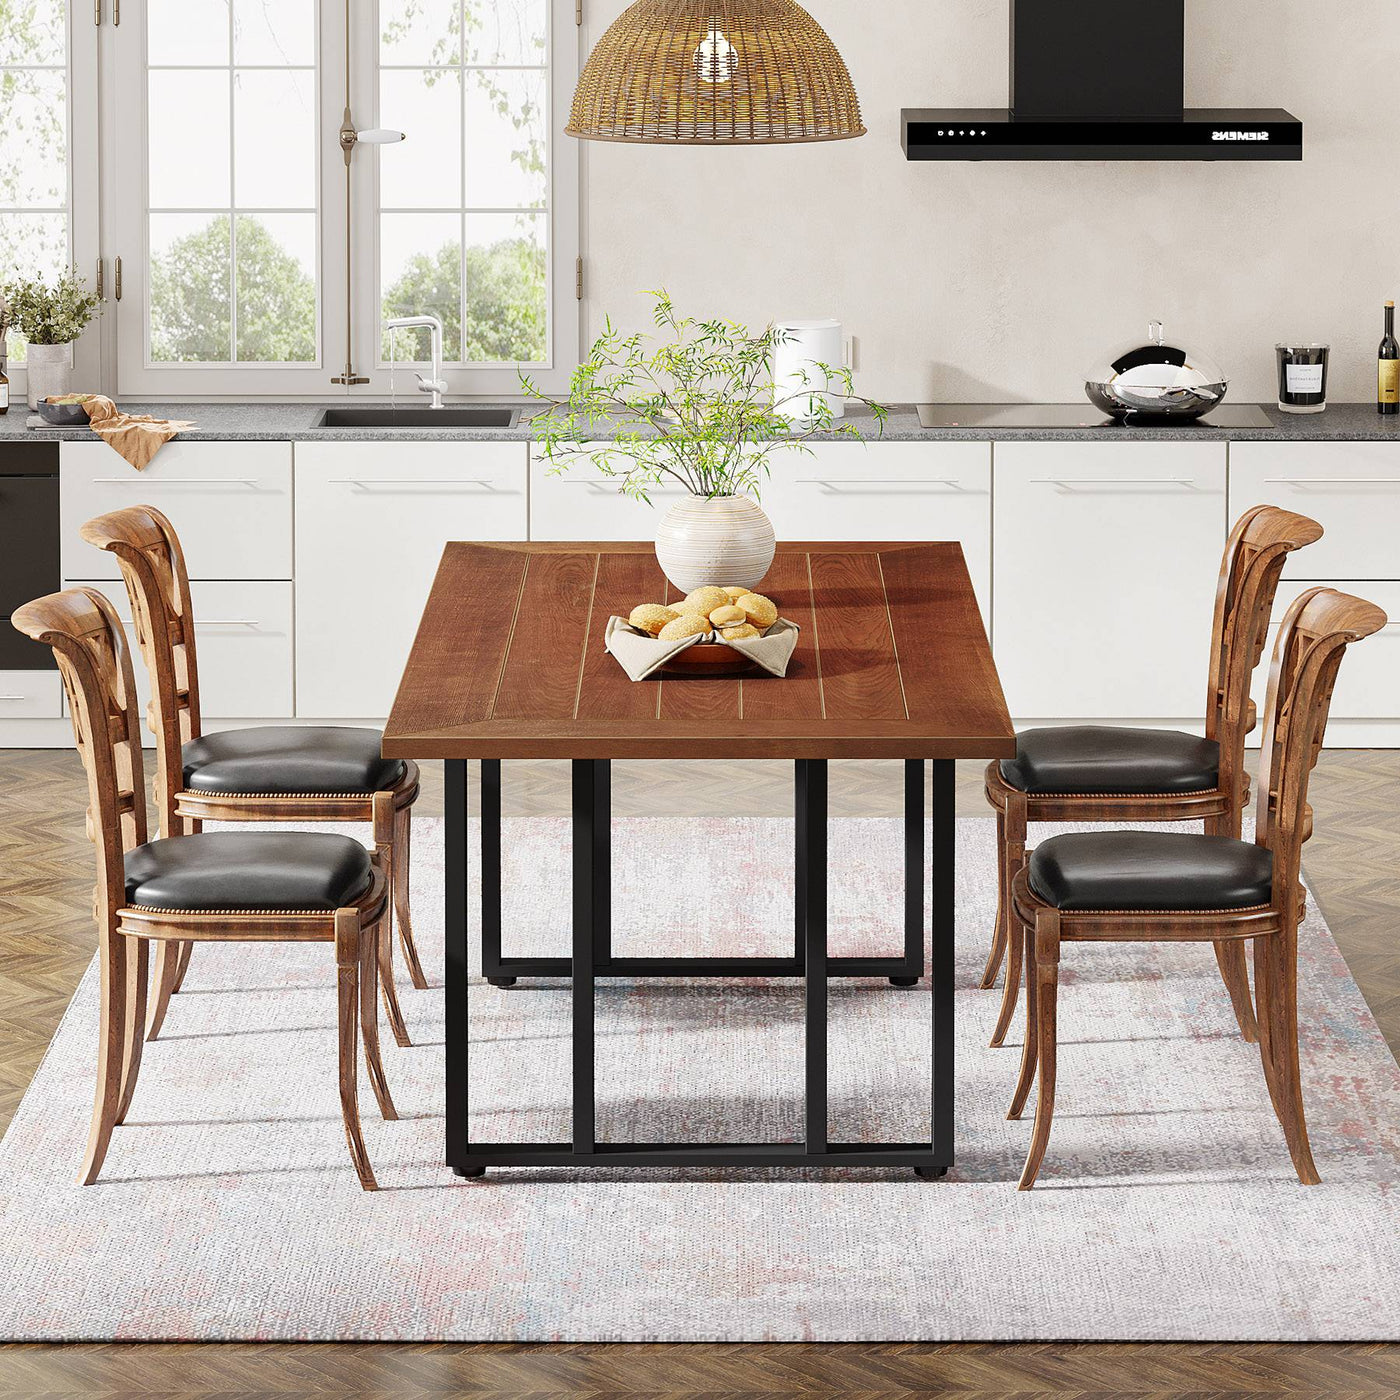 Caria 55" Dining Table for 4 | Rectangular Kitchen Table with Solid Wood Veneer